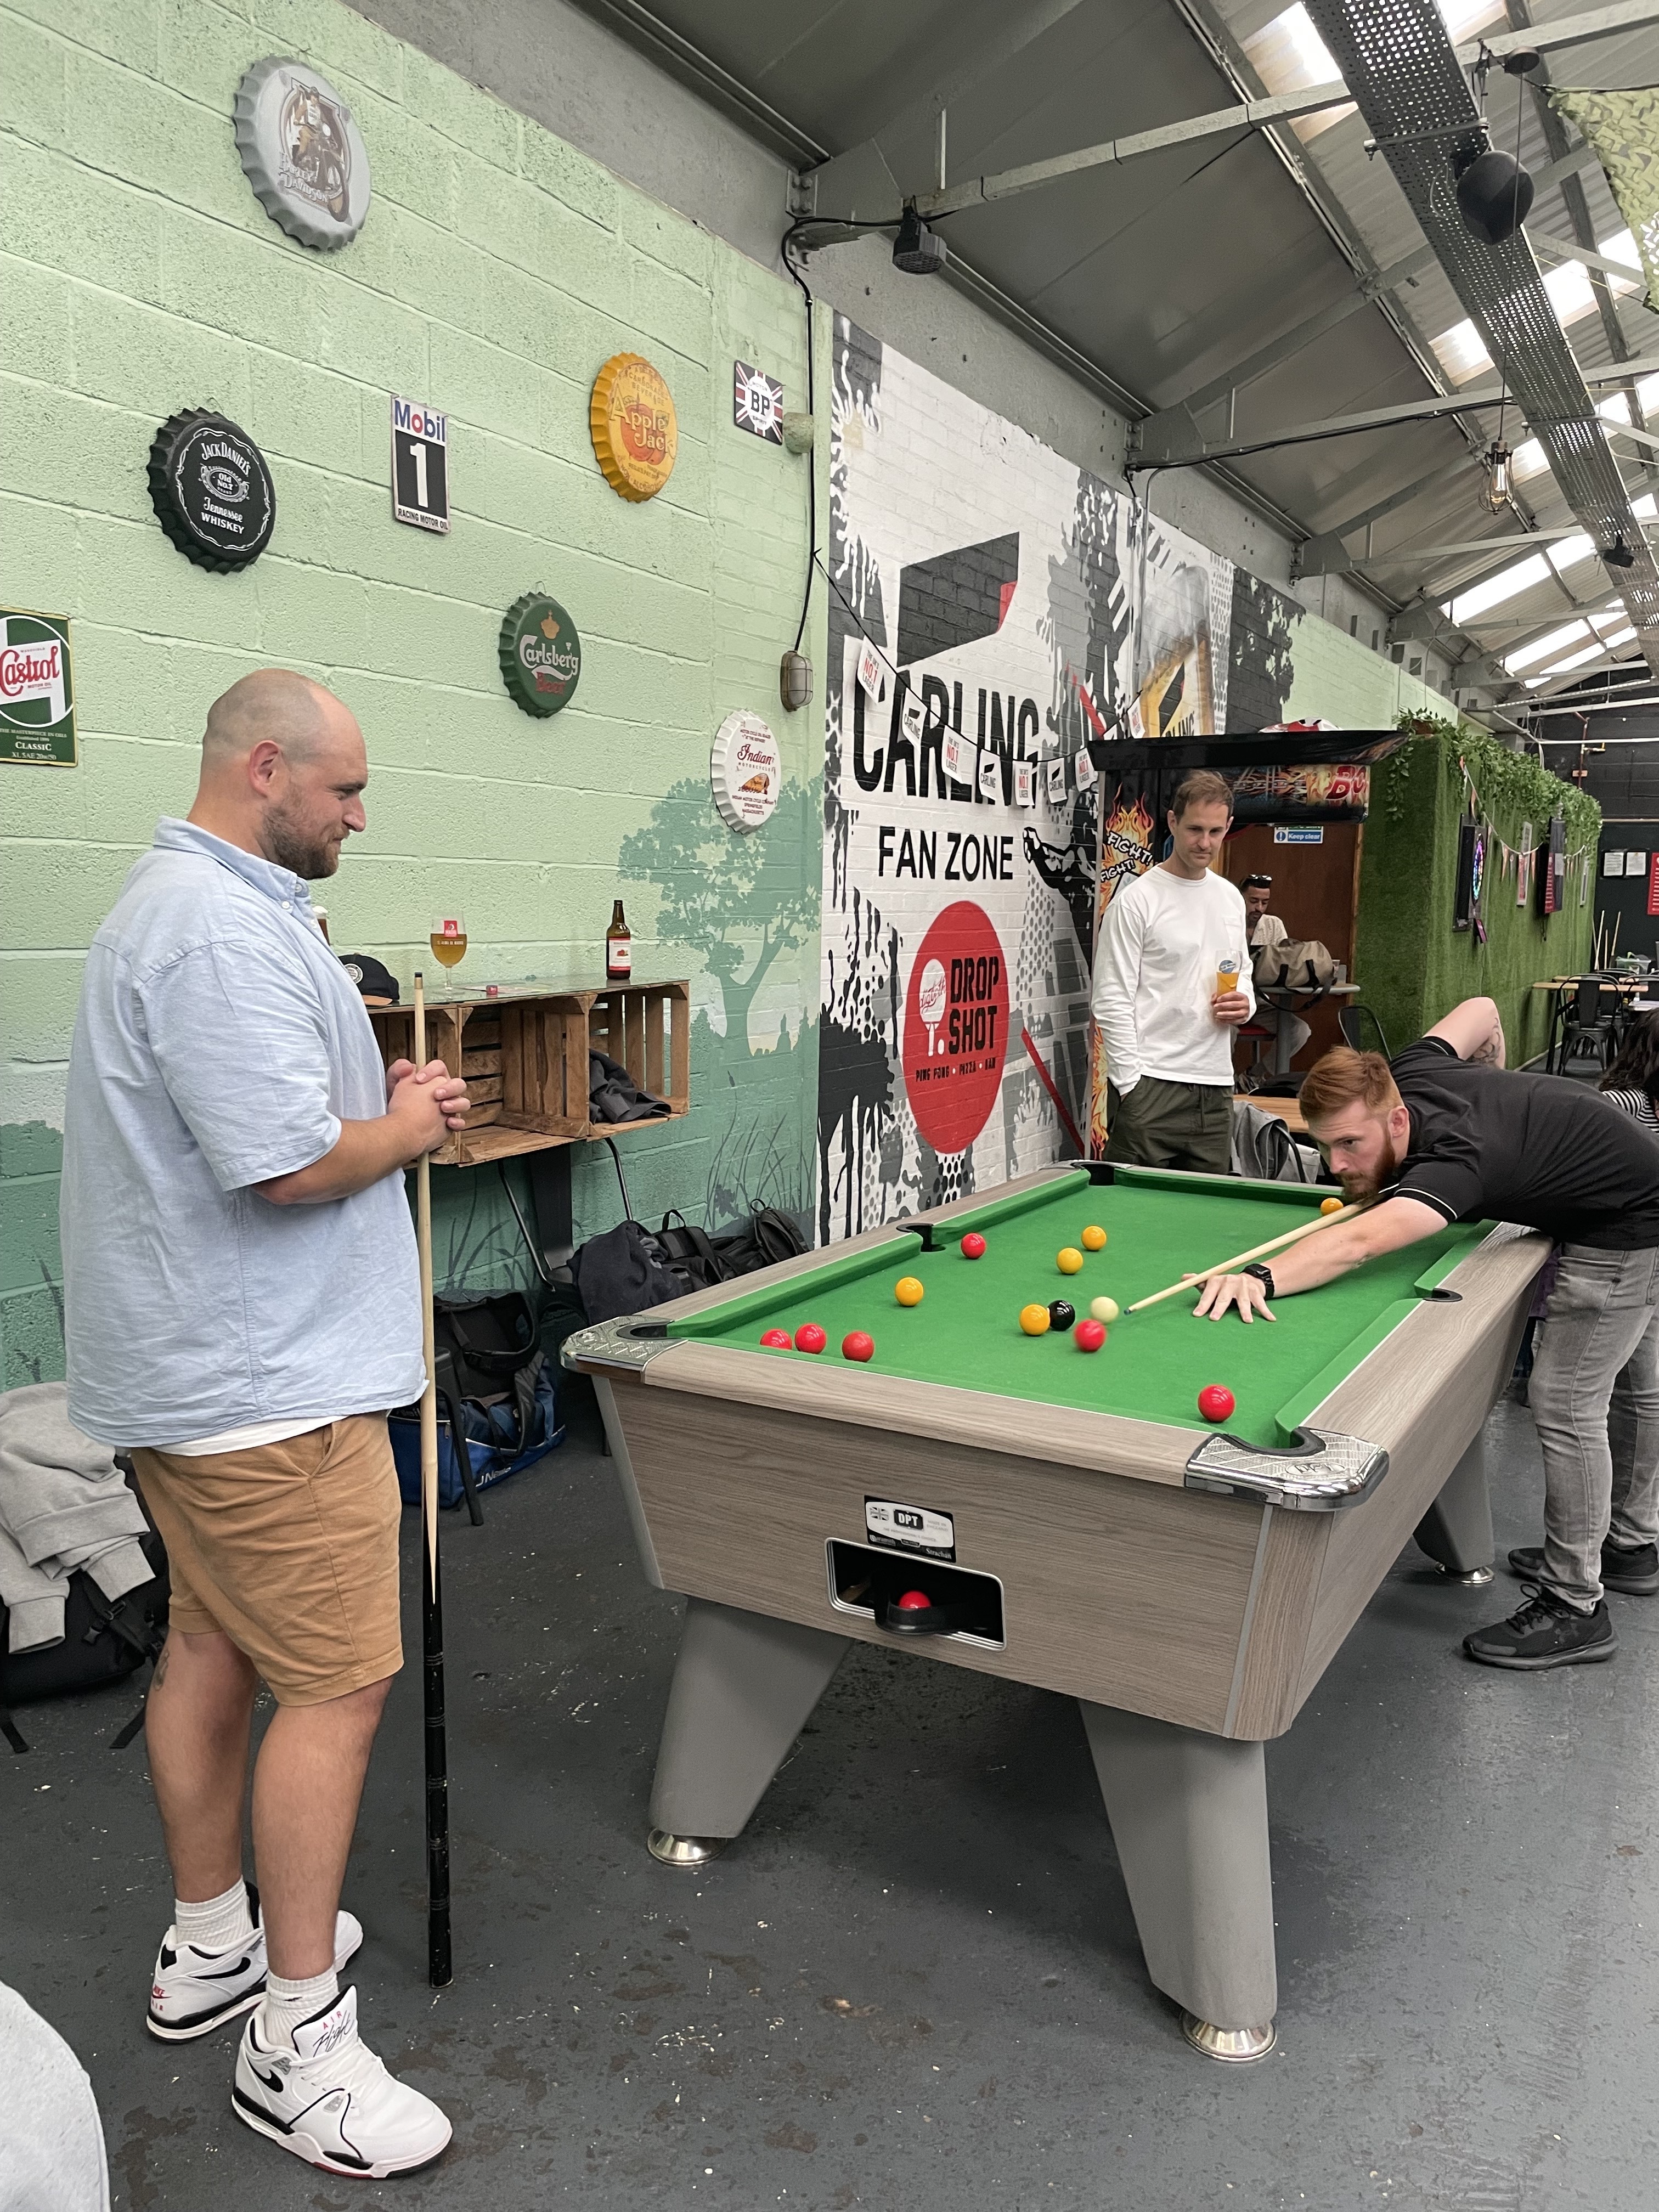 A group of people playing billiards in a warehouse while capturing their experience on Voxpopme.